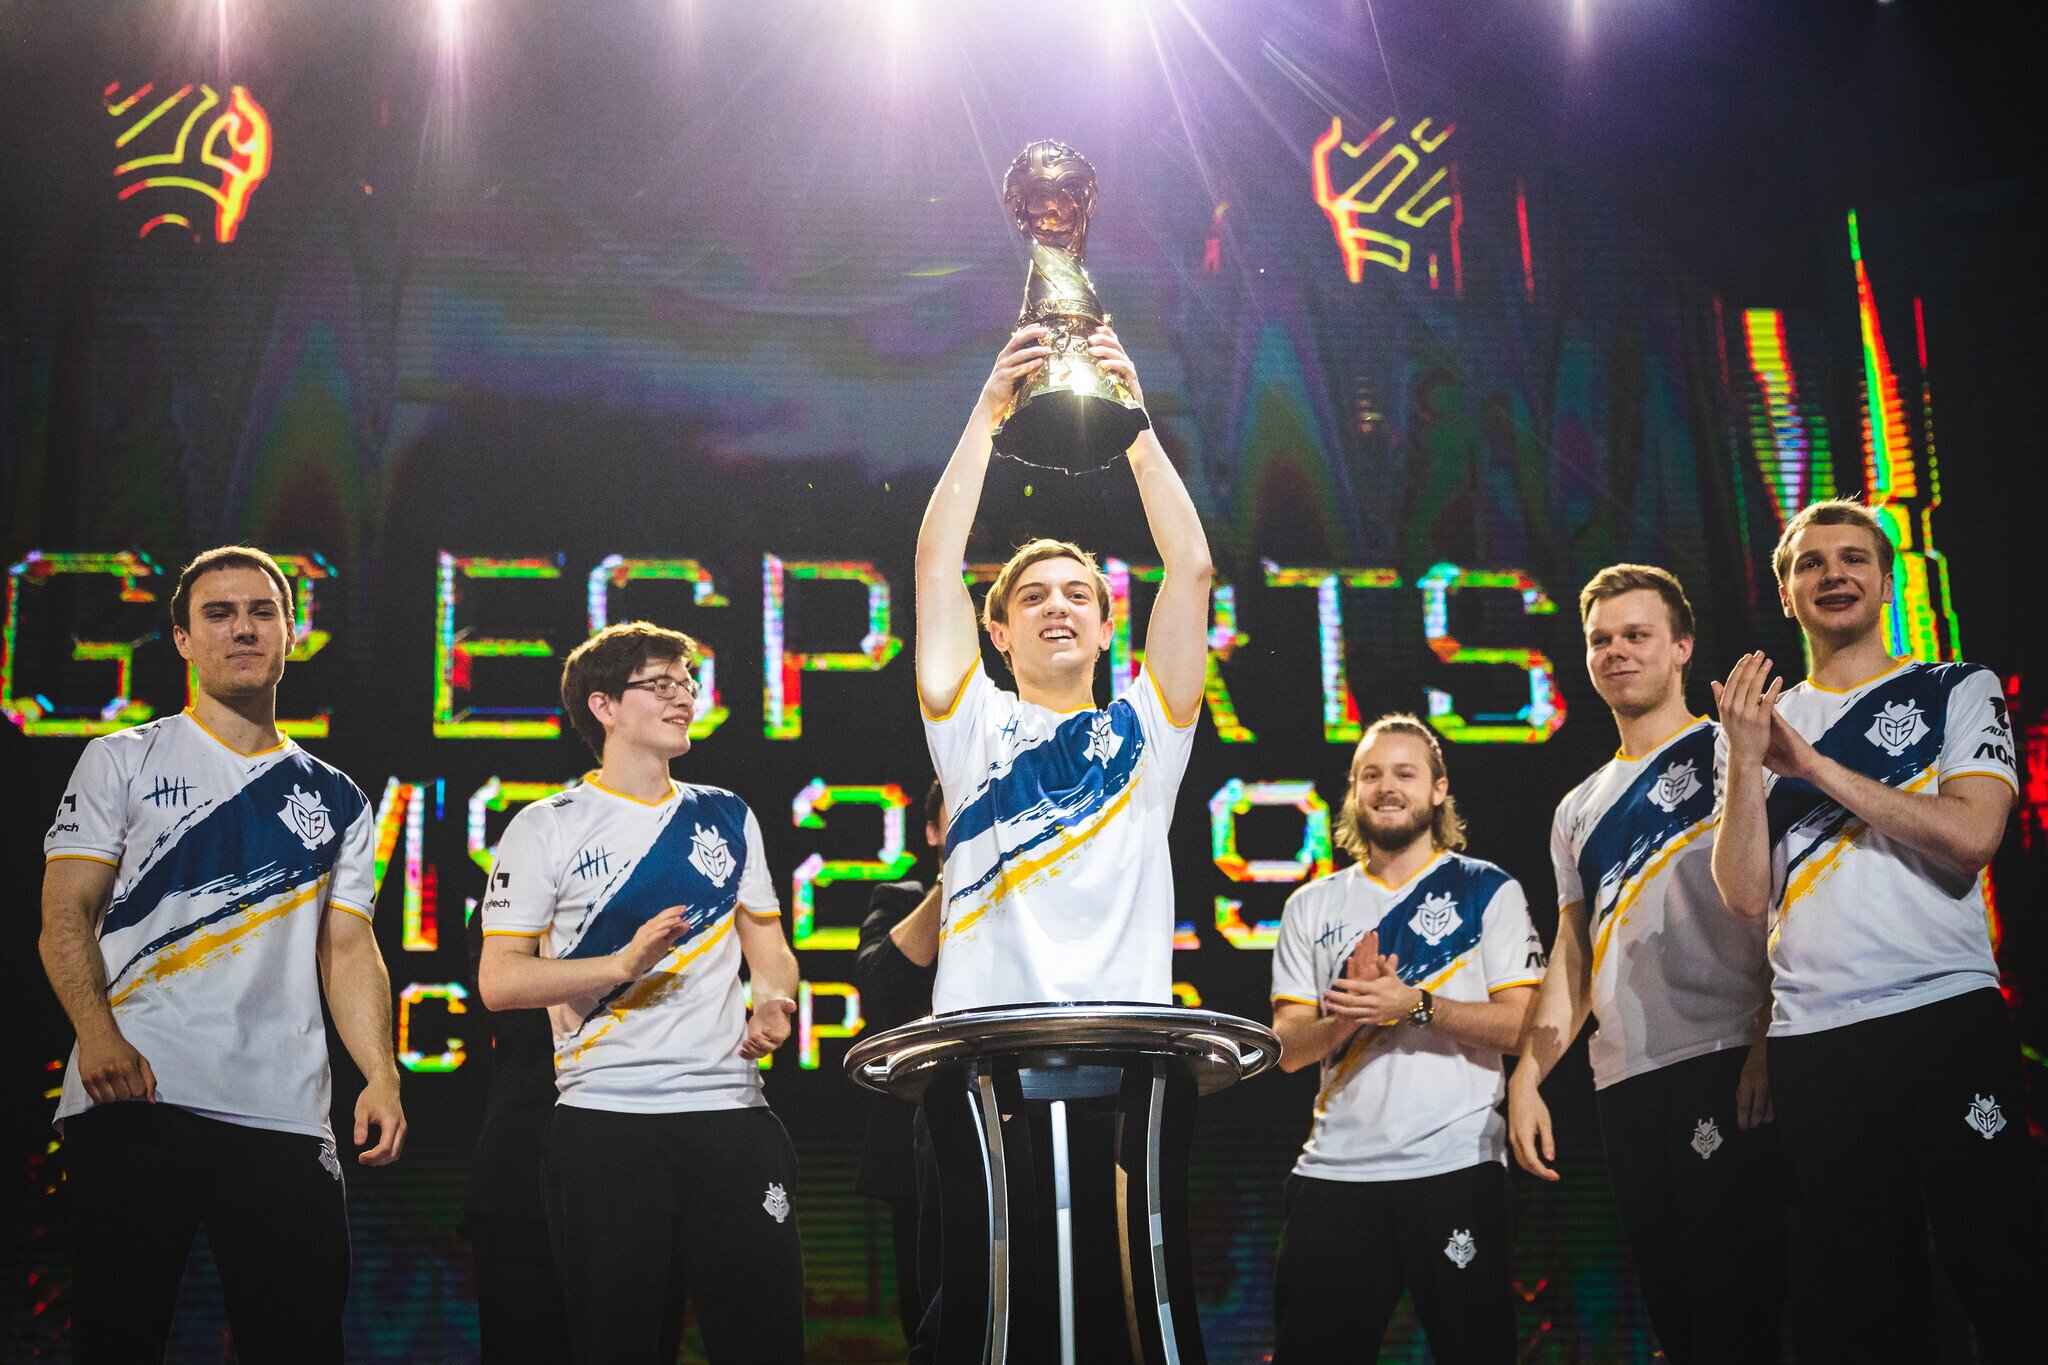 G2 Esports take home the trophy from MSI 2019. (Photo by Colin Young-Wolff/Riot Games)